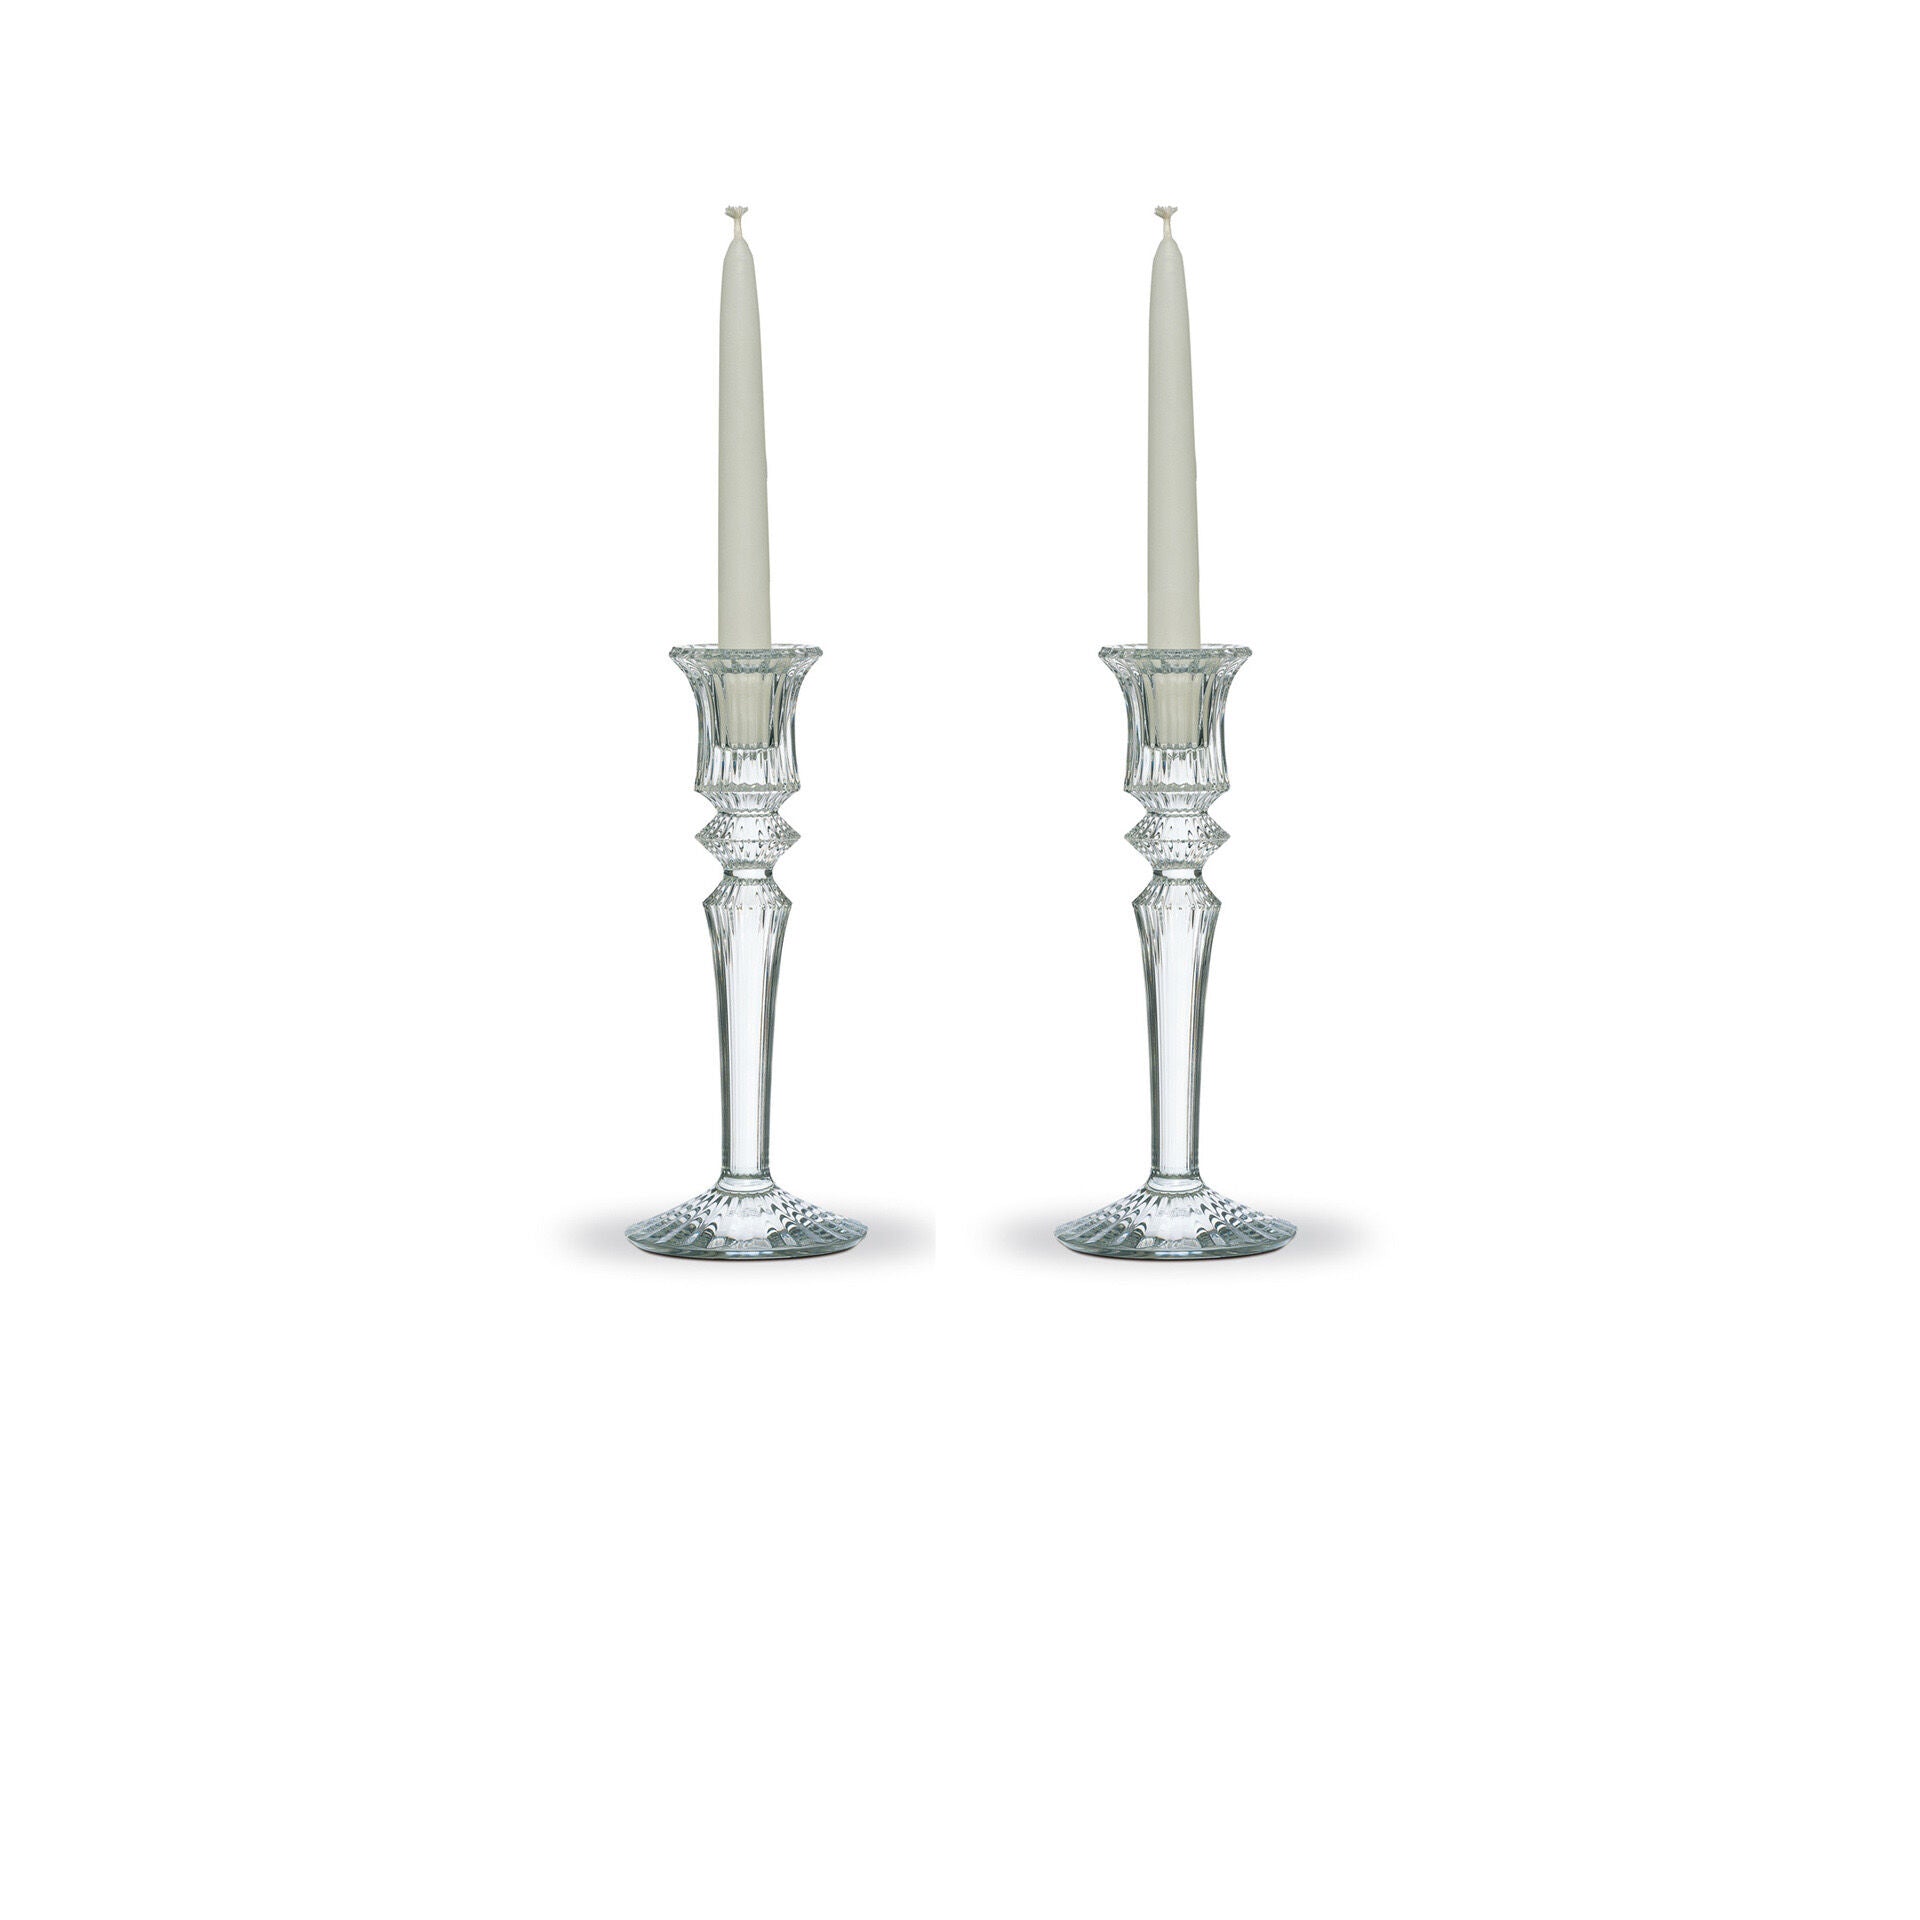 Baccarat Mille Nuits Candlestick - Set of 2